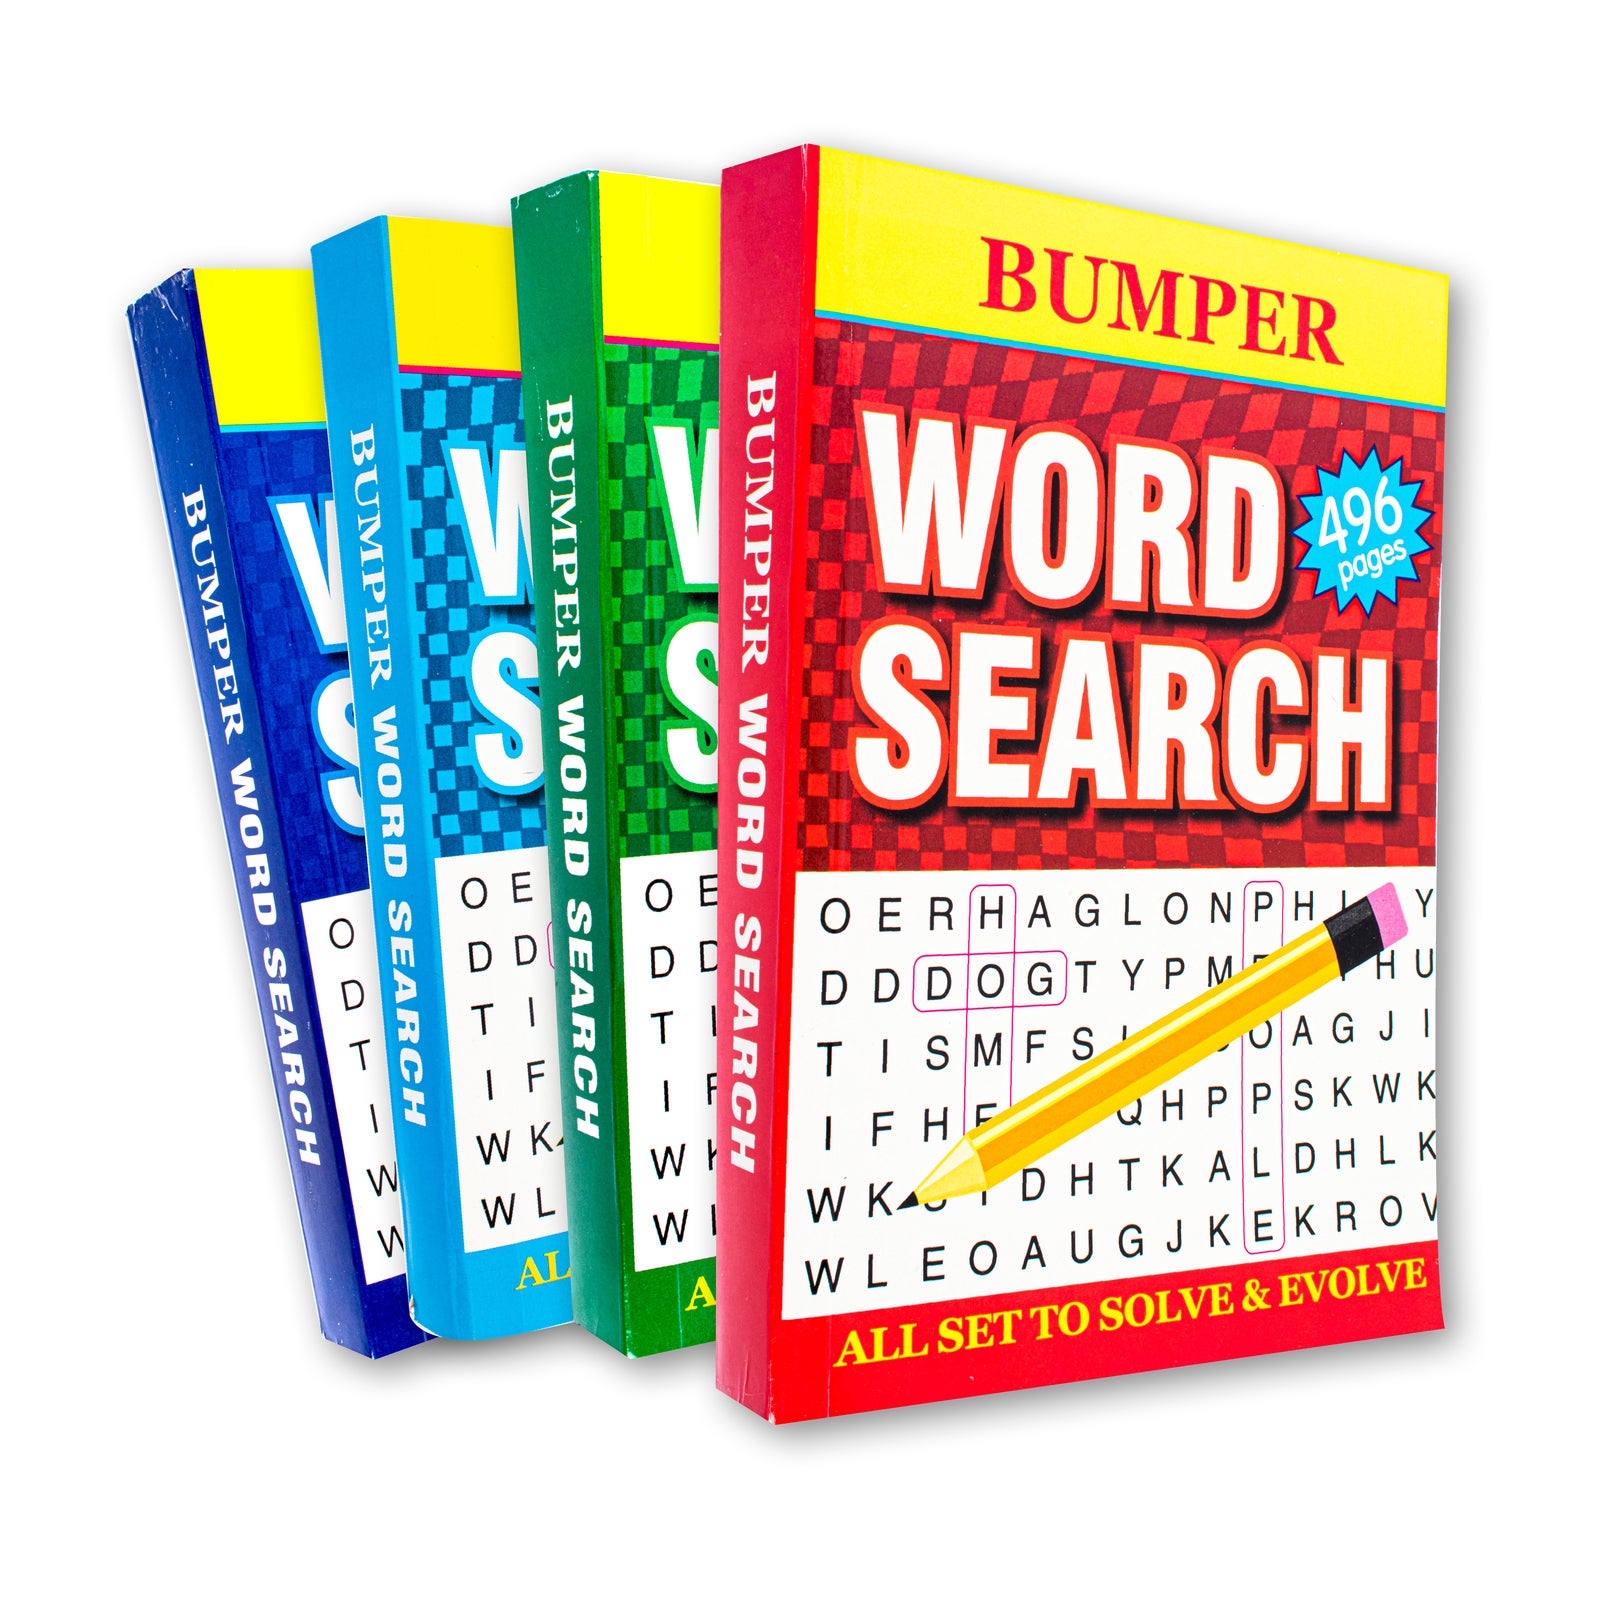 Word Search 4PK Activity Books Bumper 496PG A5 Size Adult Brain Games Fun